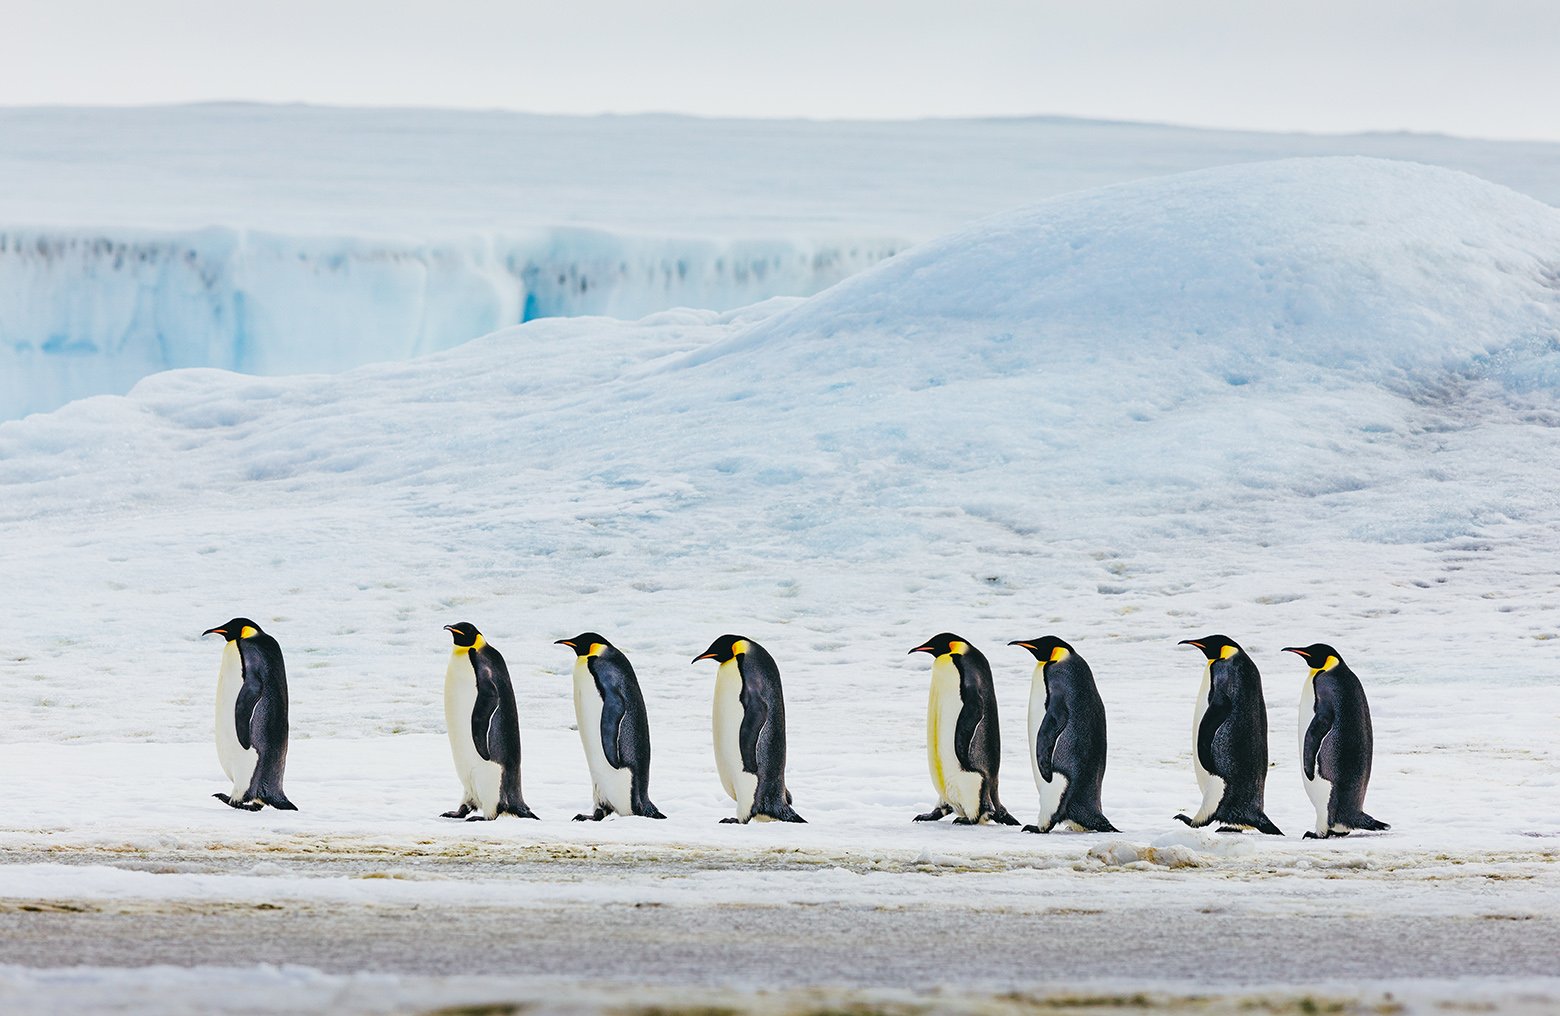 The march of emperor penguins at Snow Hill Island, Antarctica.